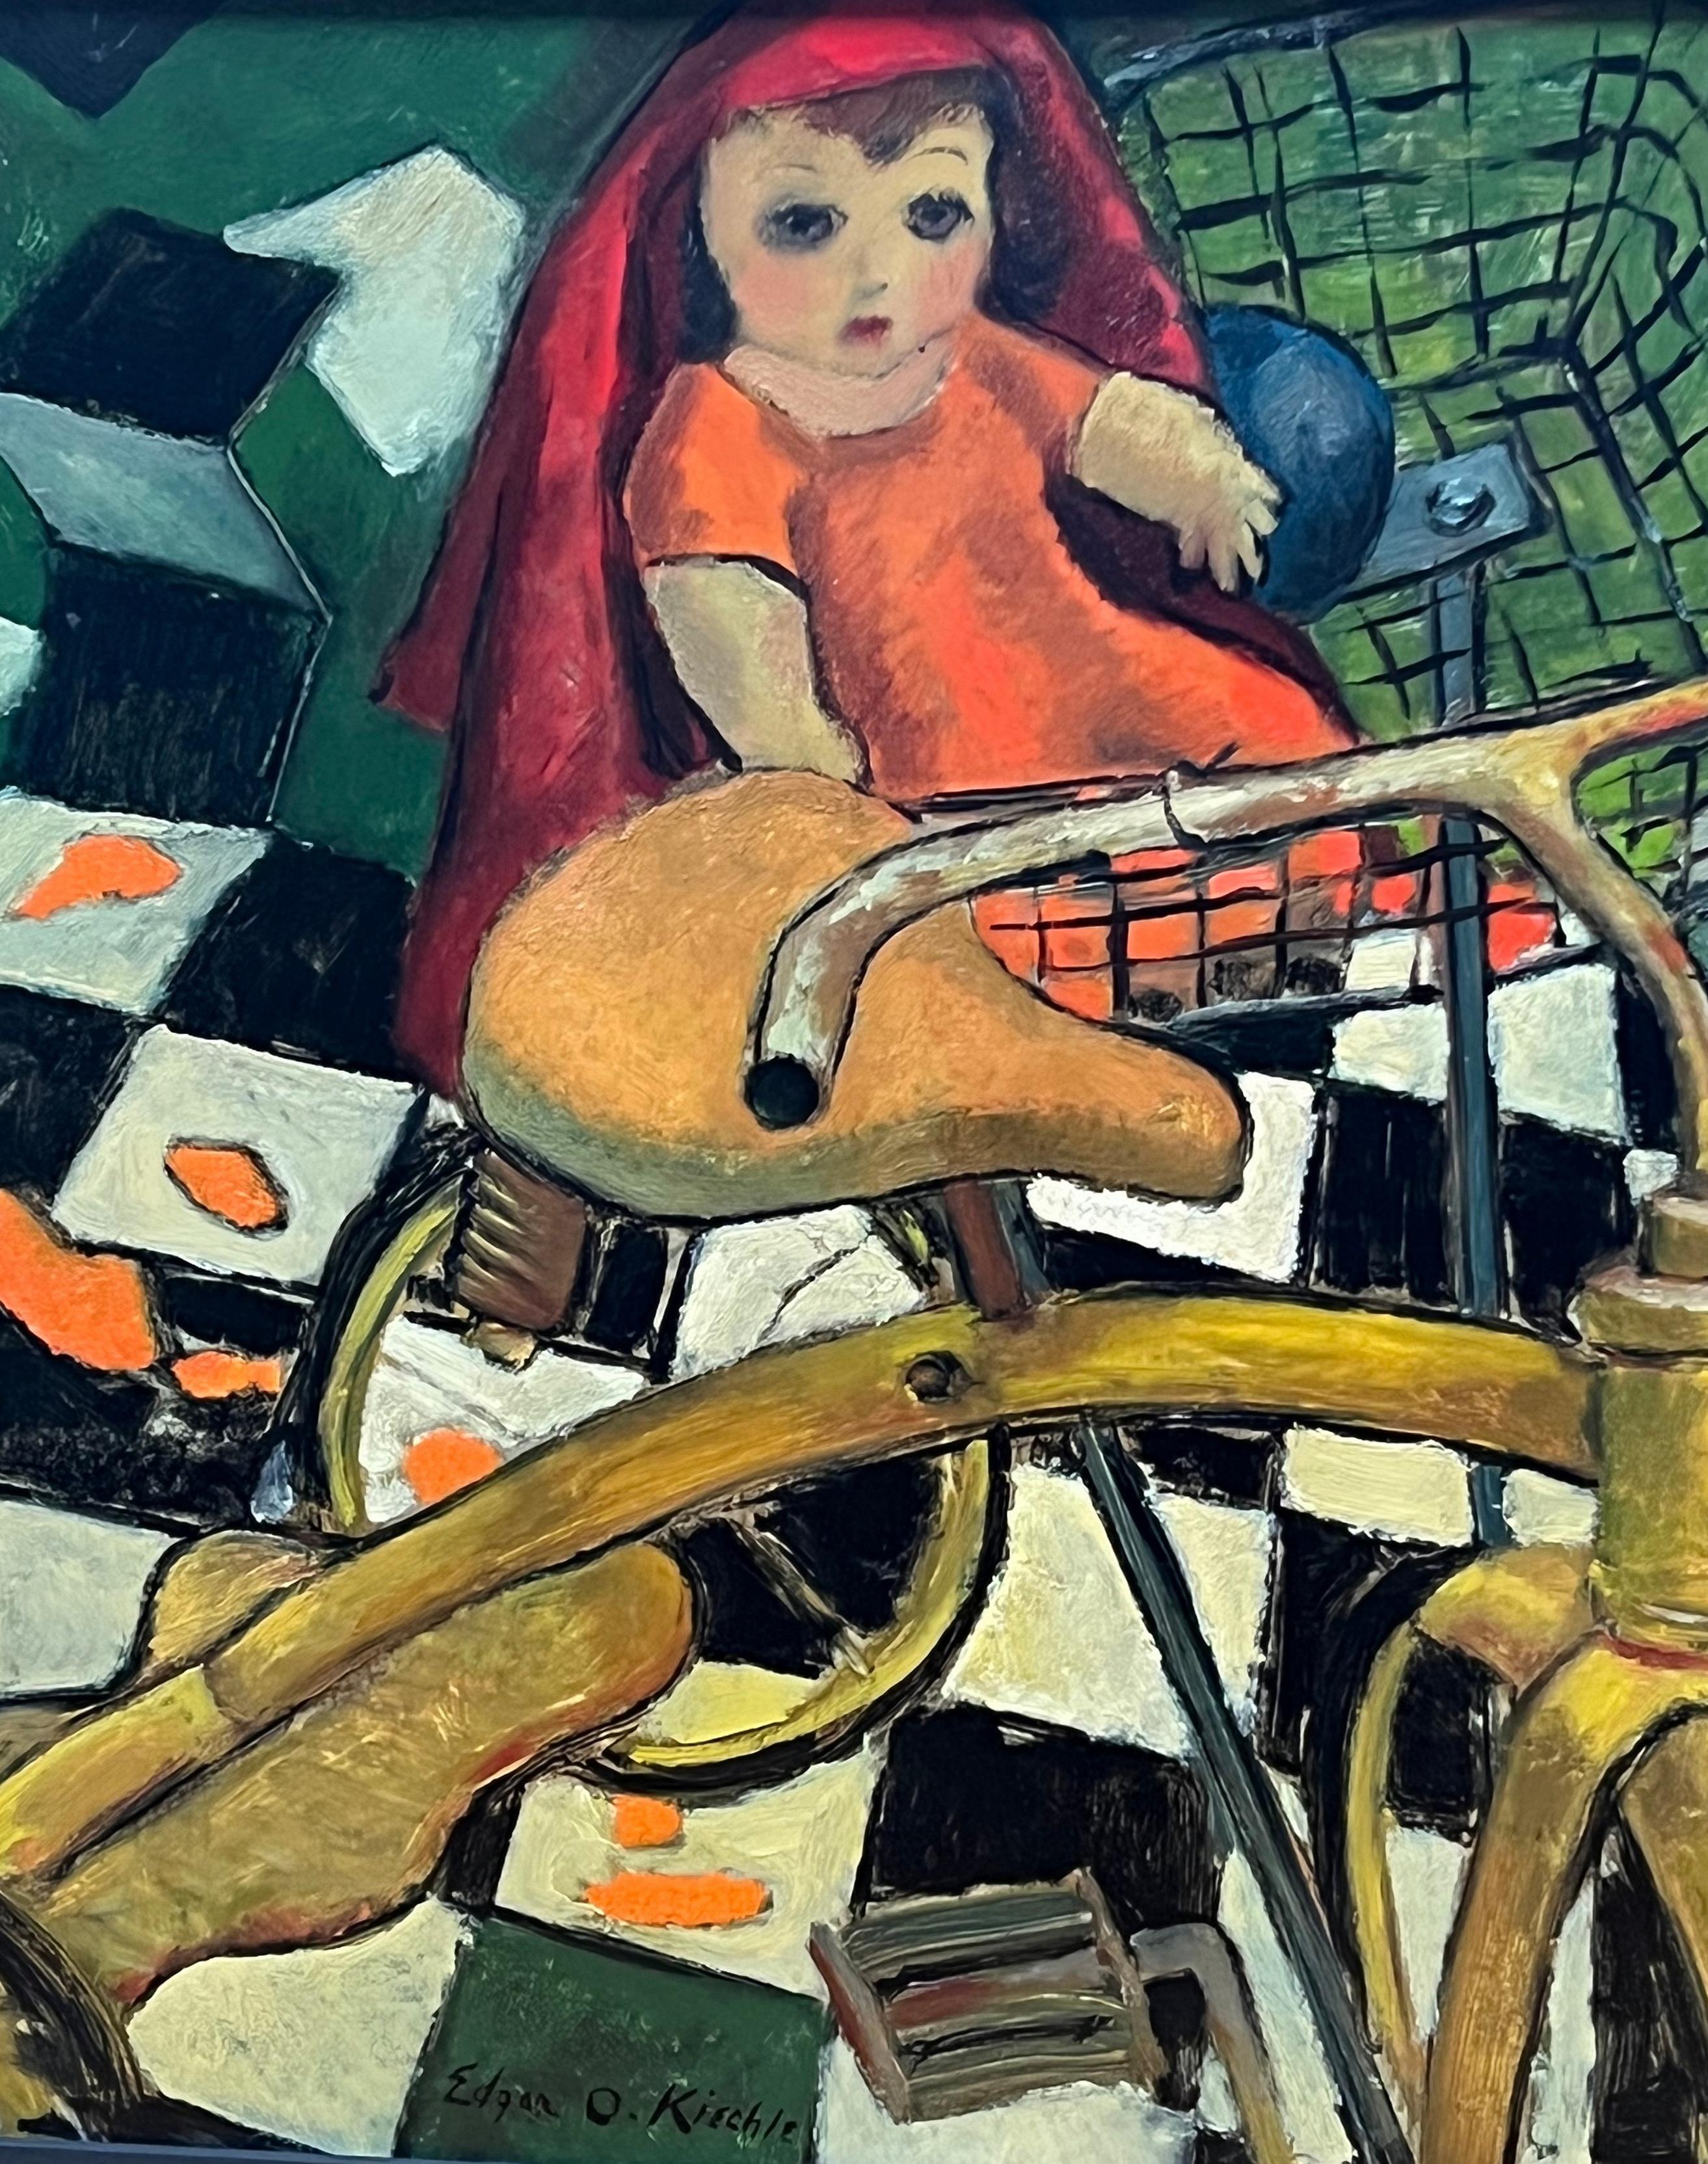 This figurative painting by Edgard Kiechle presents the scenario of a doll who is very surprised to have been abandoned into the basket of her mom's tricycle.
An interesting factor is the pictorial use of angles. The point of view, a little above